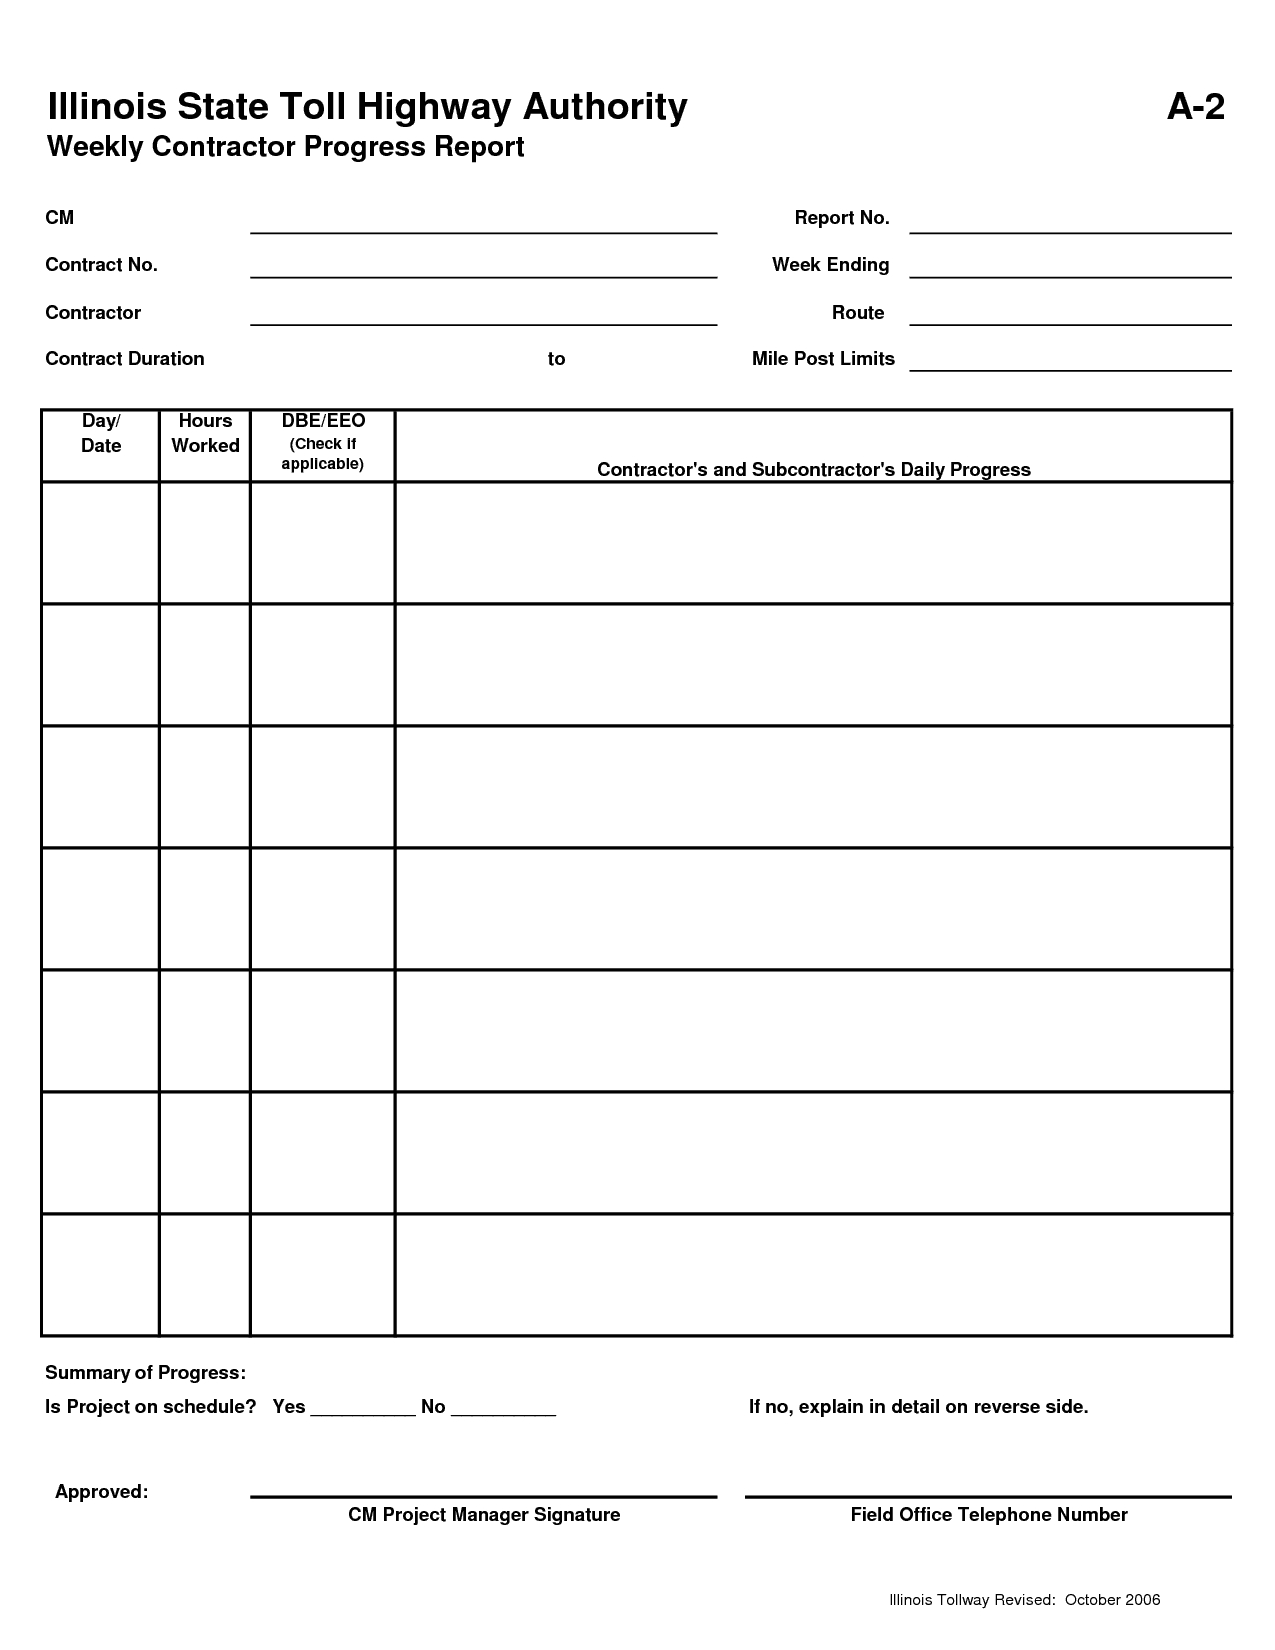 Bookkeeping Eadsheet For Small Business And Gas Station Pertaining To Sales Manager Monthly Report Templates